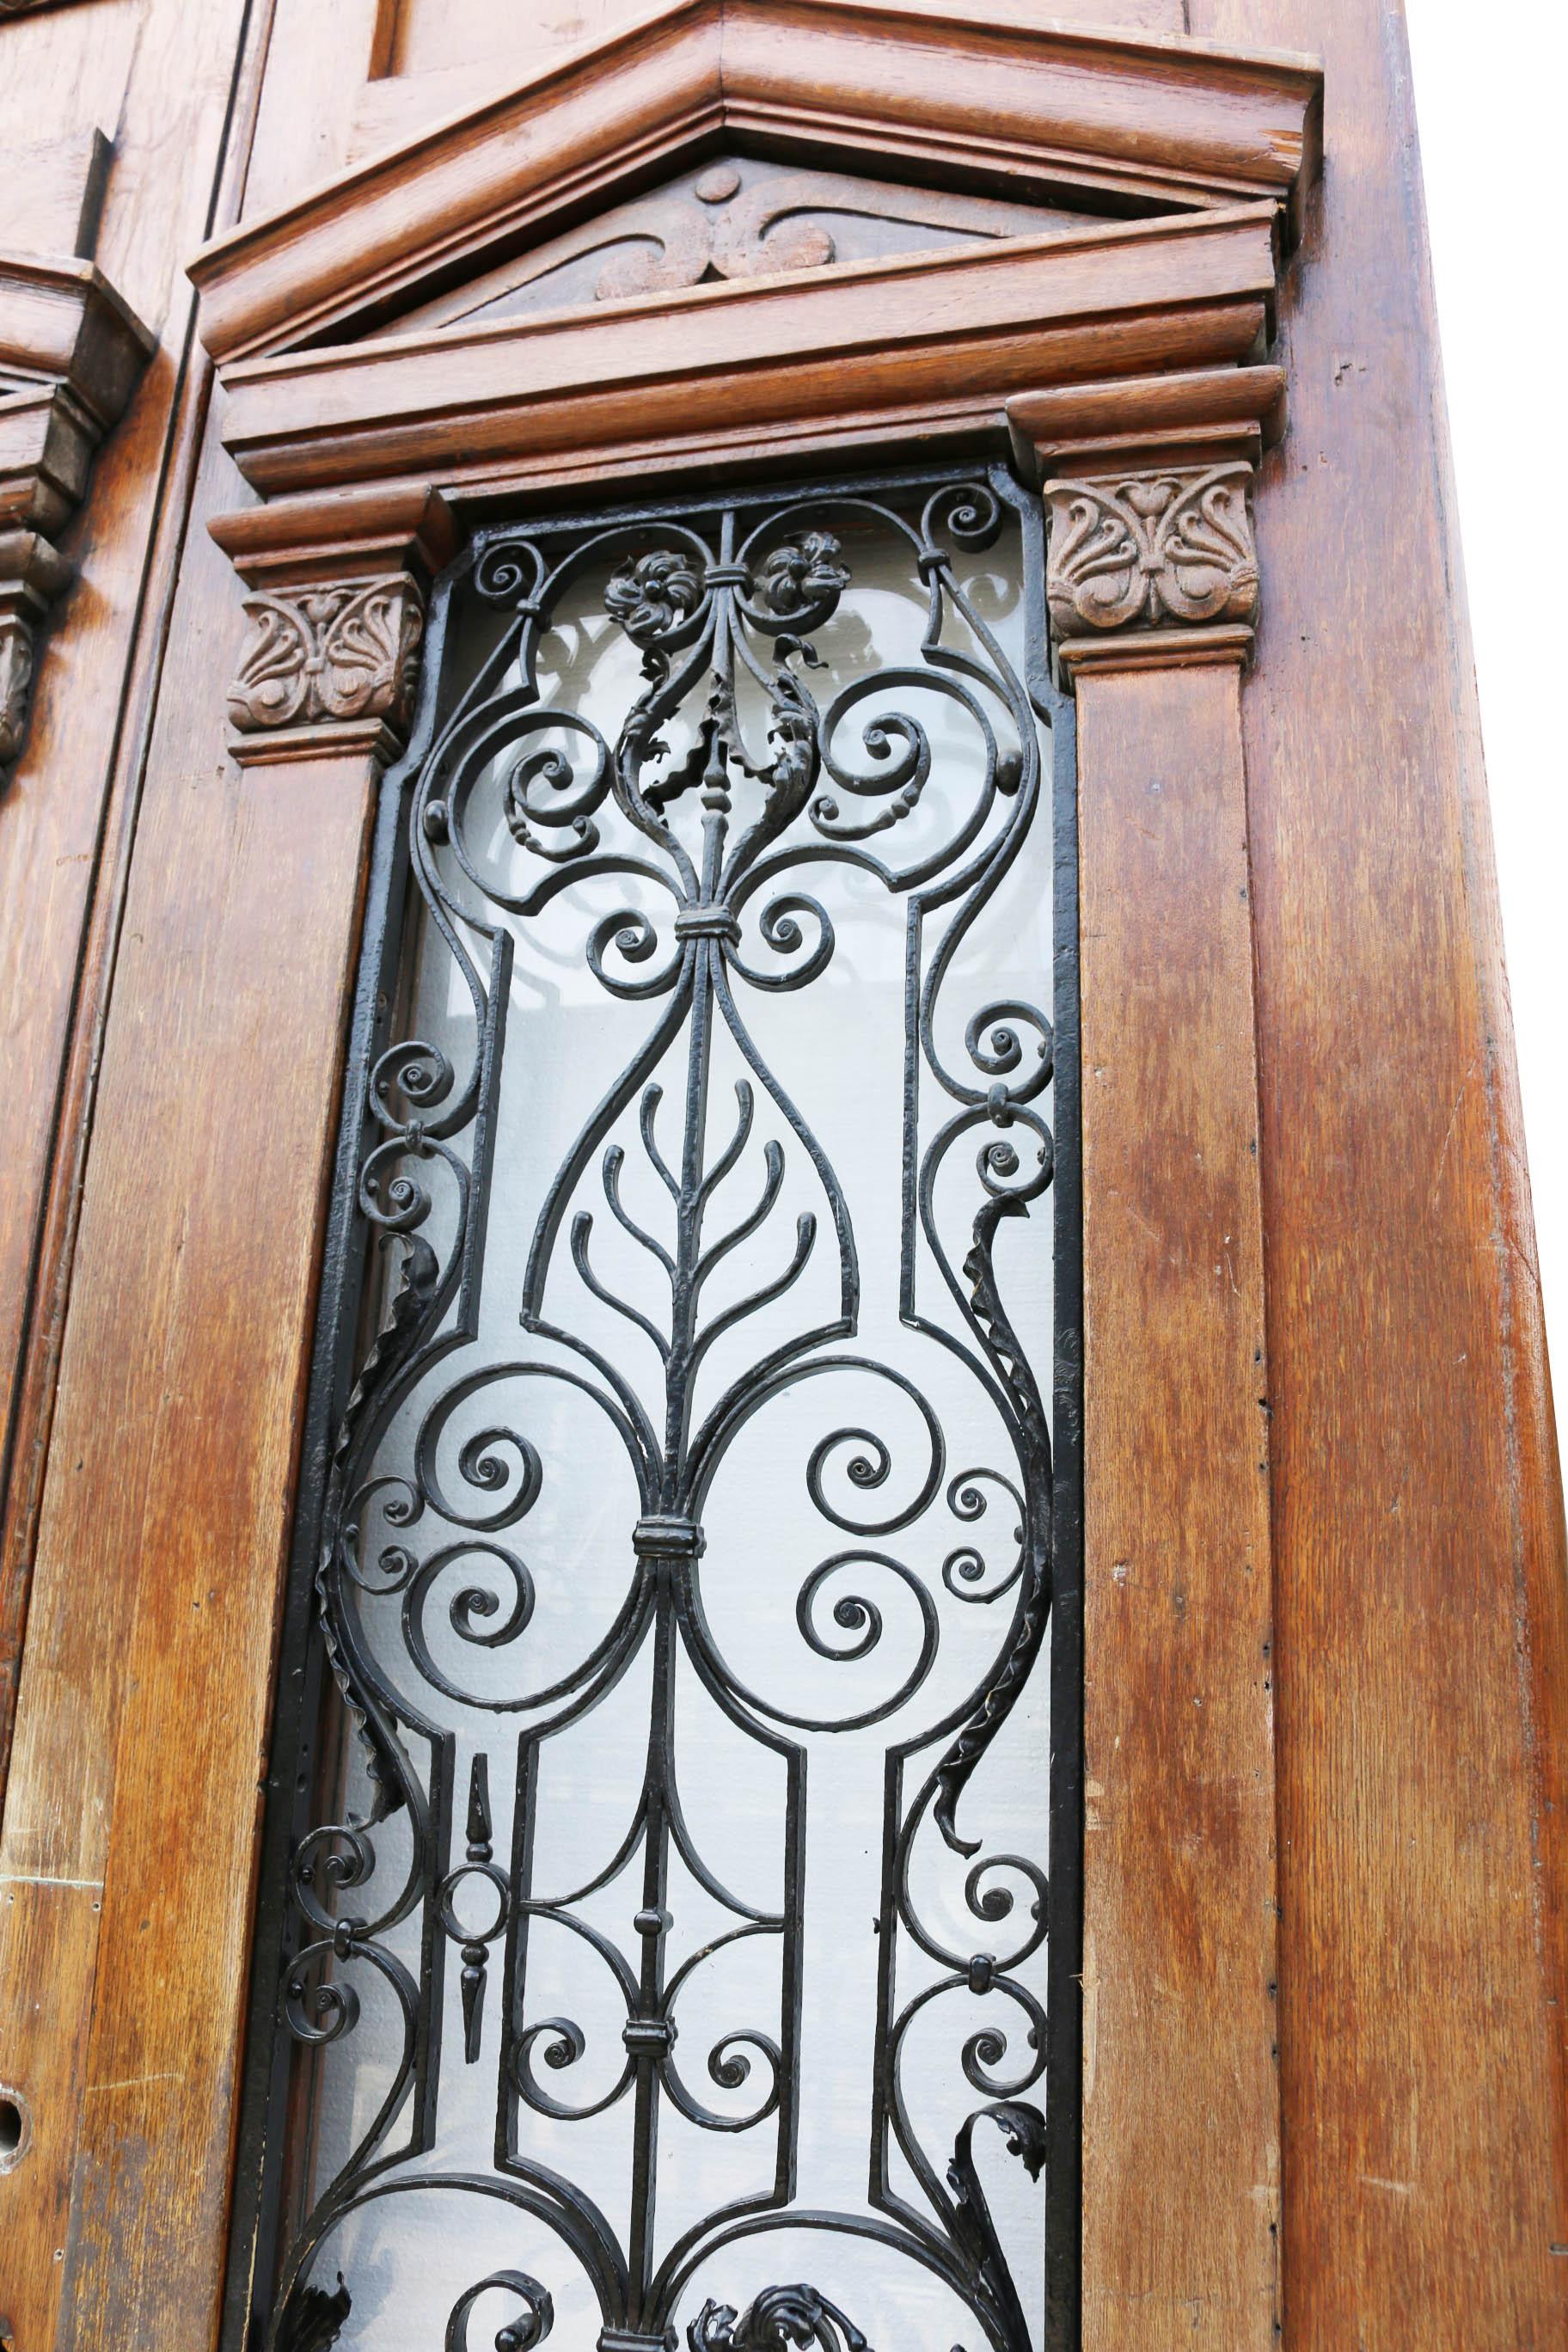 Set of Large Oak Doors with Wrought Iron Grills In Good Condition For Sale In Wormelow, Herefordshire